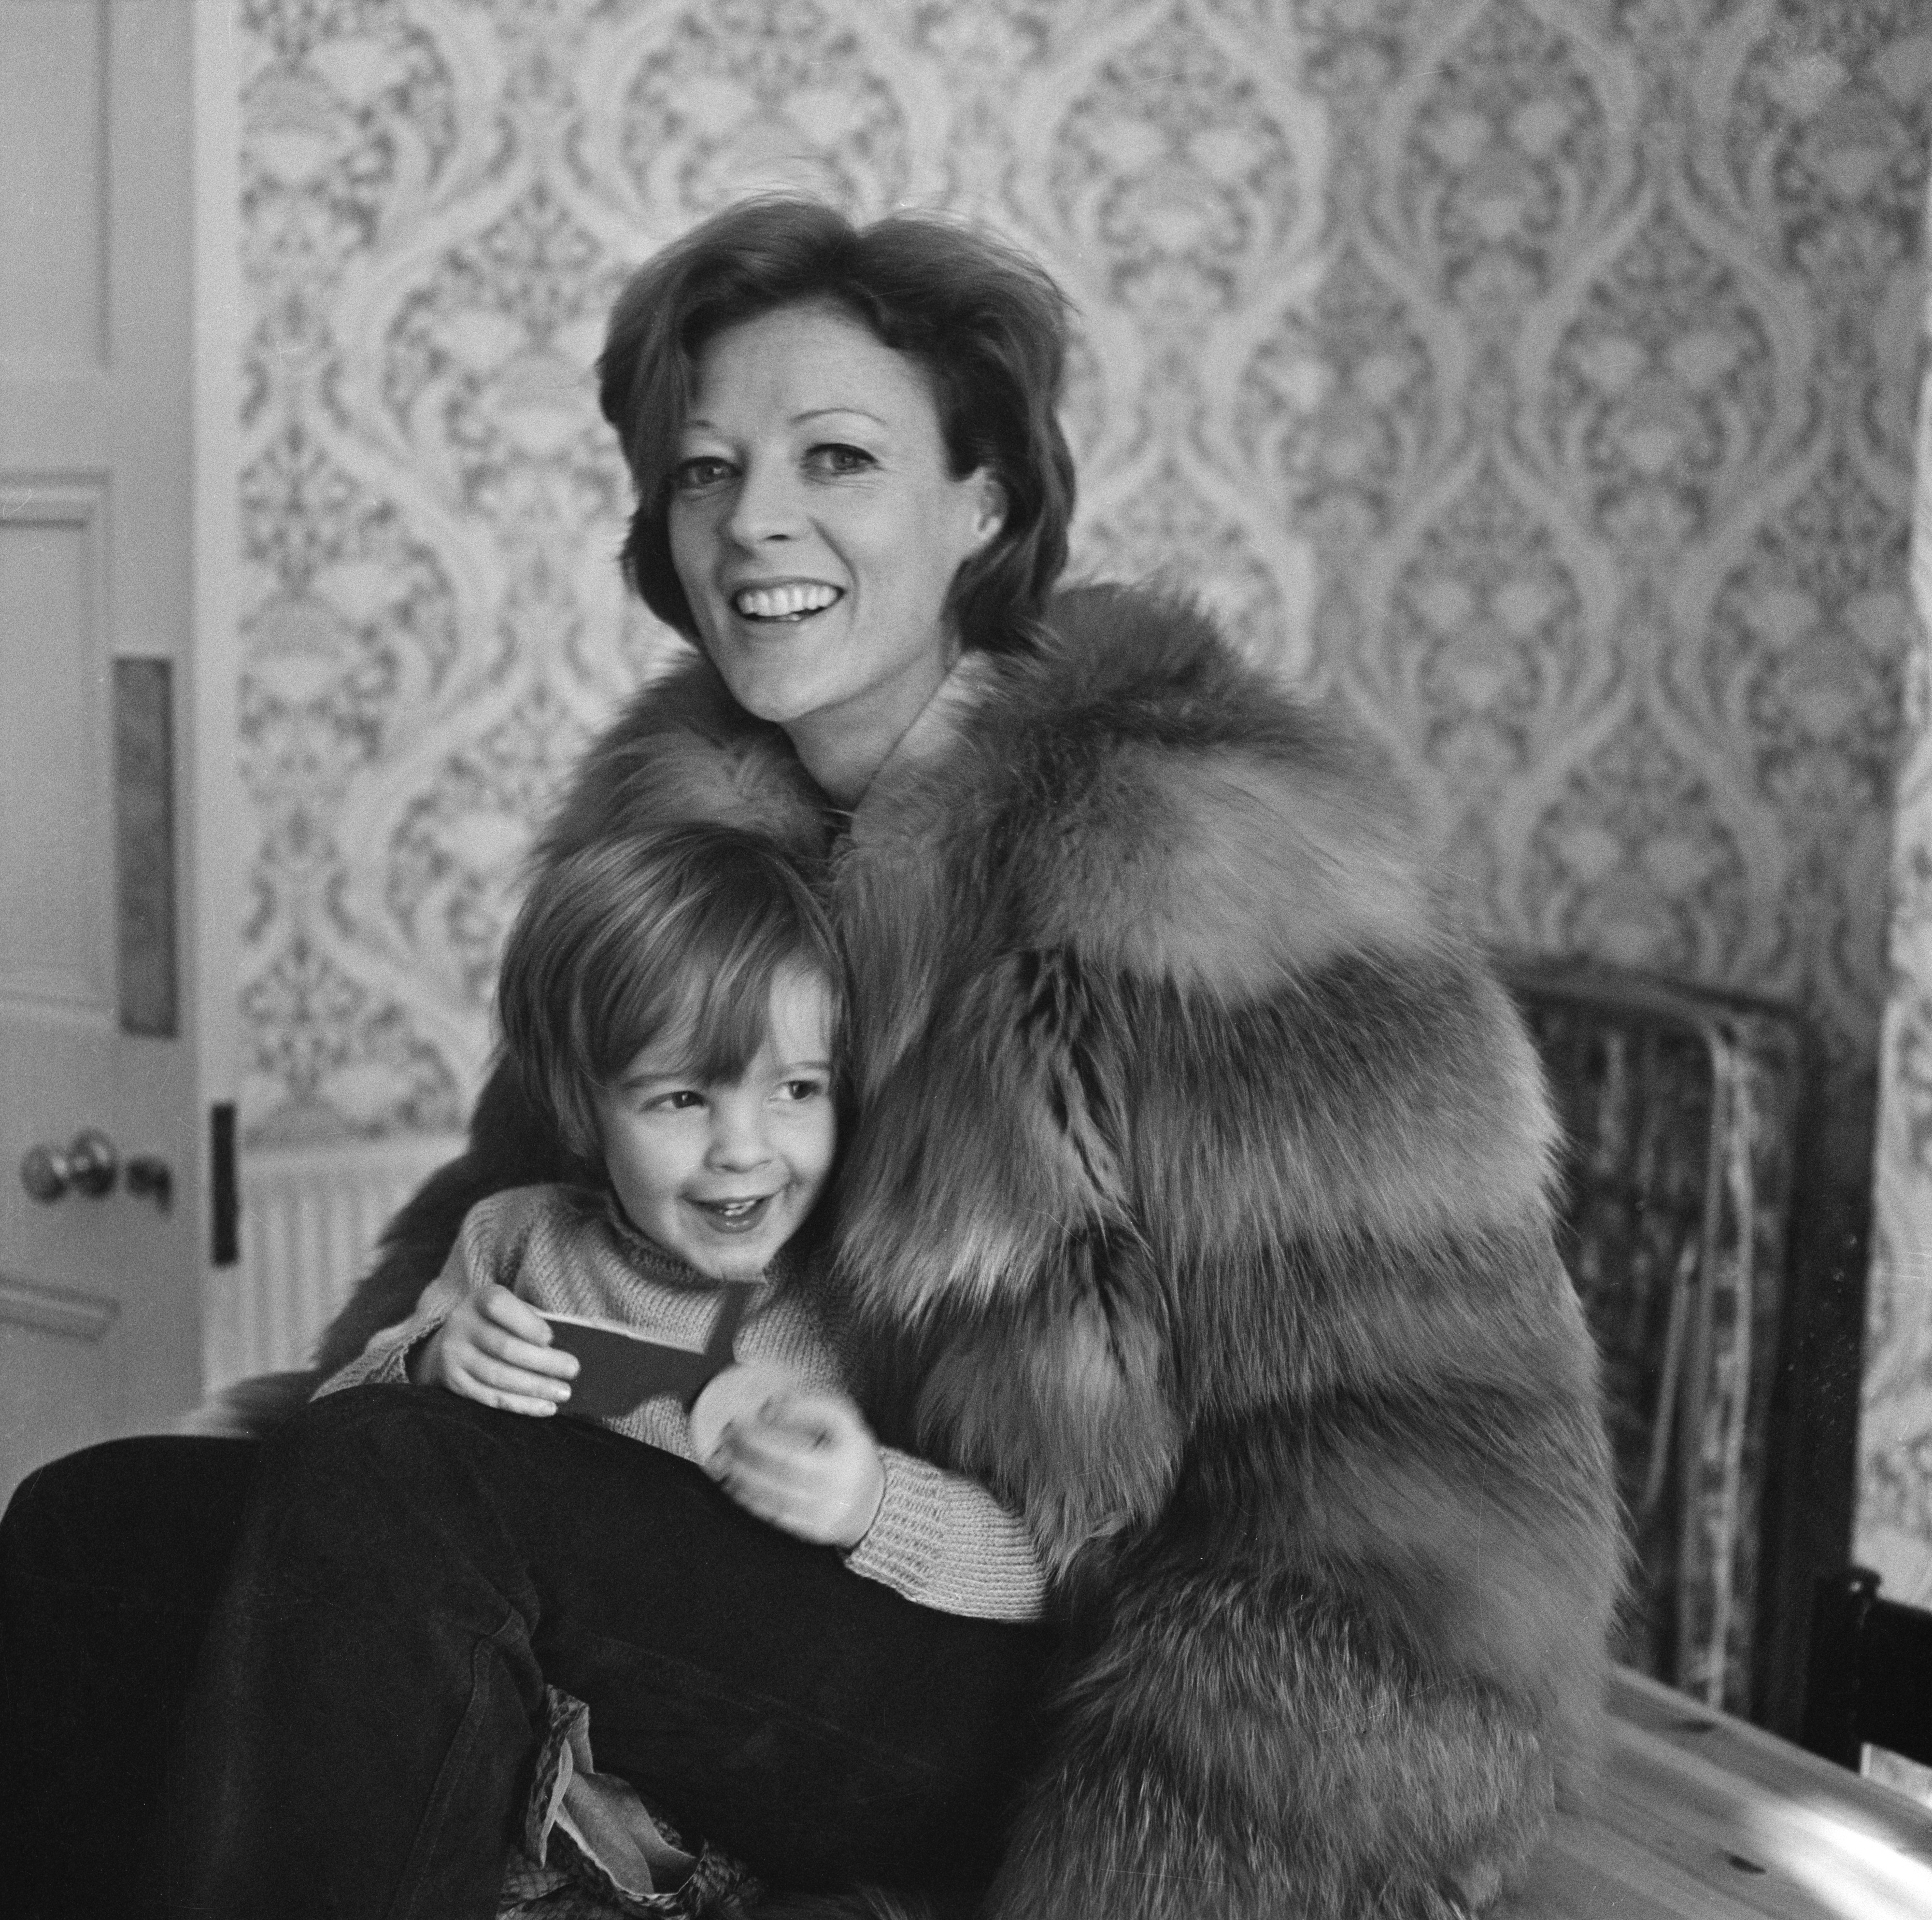 Maggie smiling, sitting with a young child, and wearing a fur coat and pants